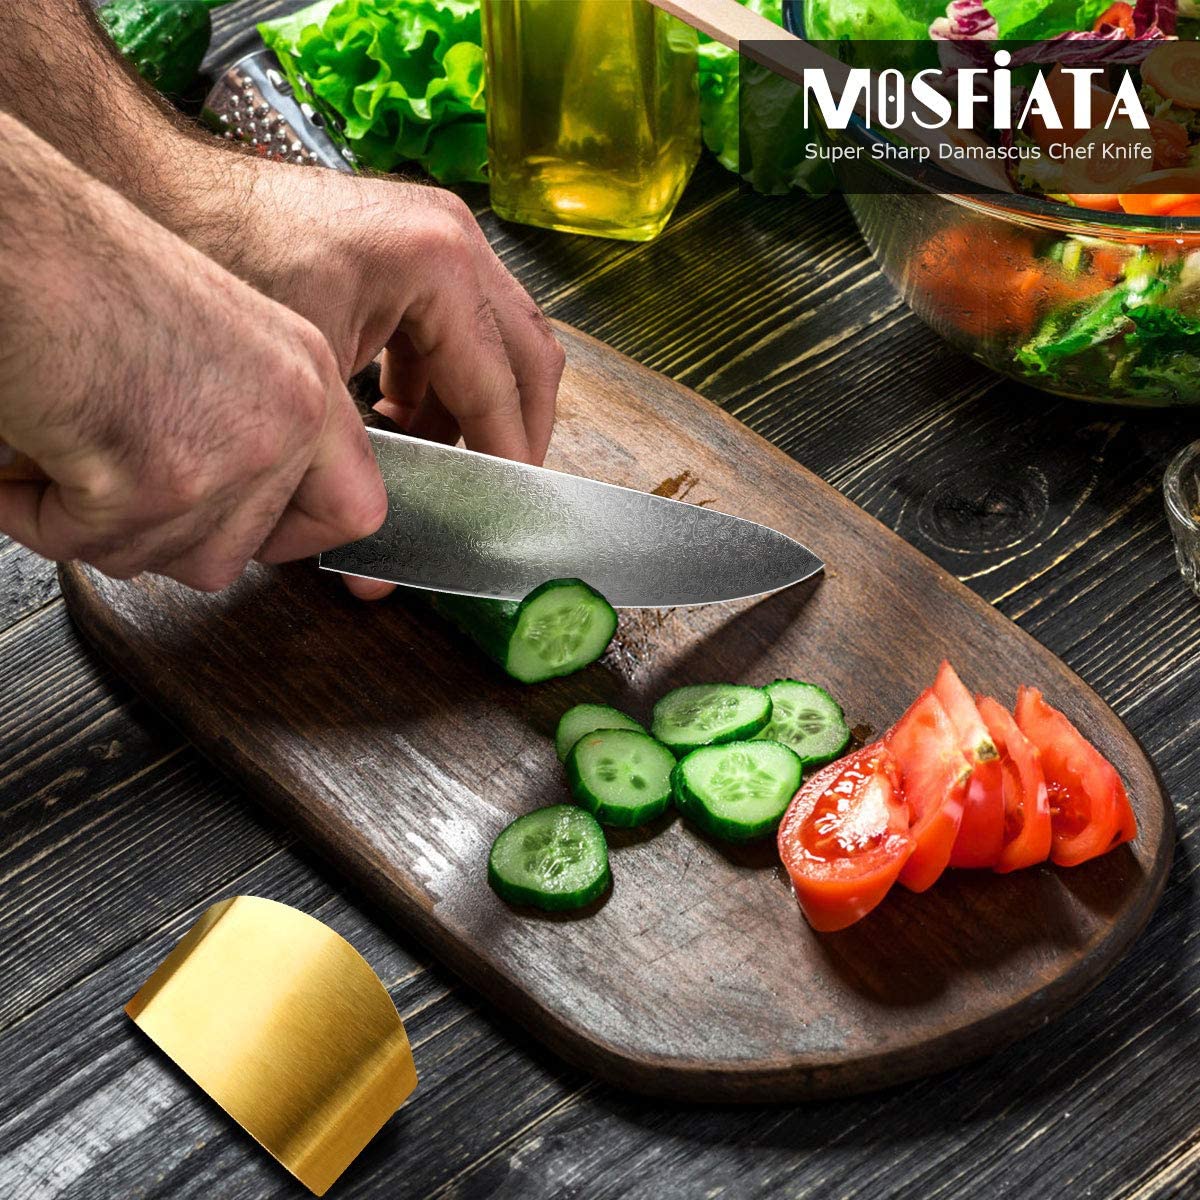  MOSFiATA Chef Knife 10 Inch Super Sharp Professional Kitchen  Knife with Finger Guard in Gift Box, German High Carbon Stainless Steel  EN.4116 Cooking Knife with Micarta Handle: Home & Kitchen